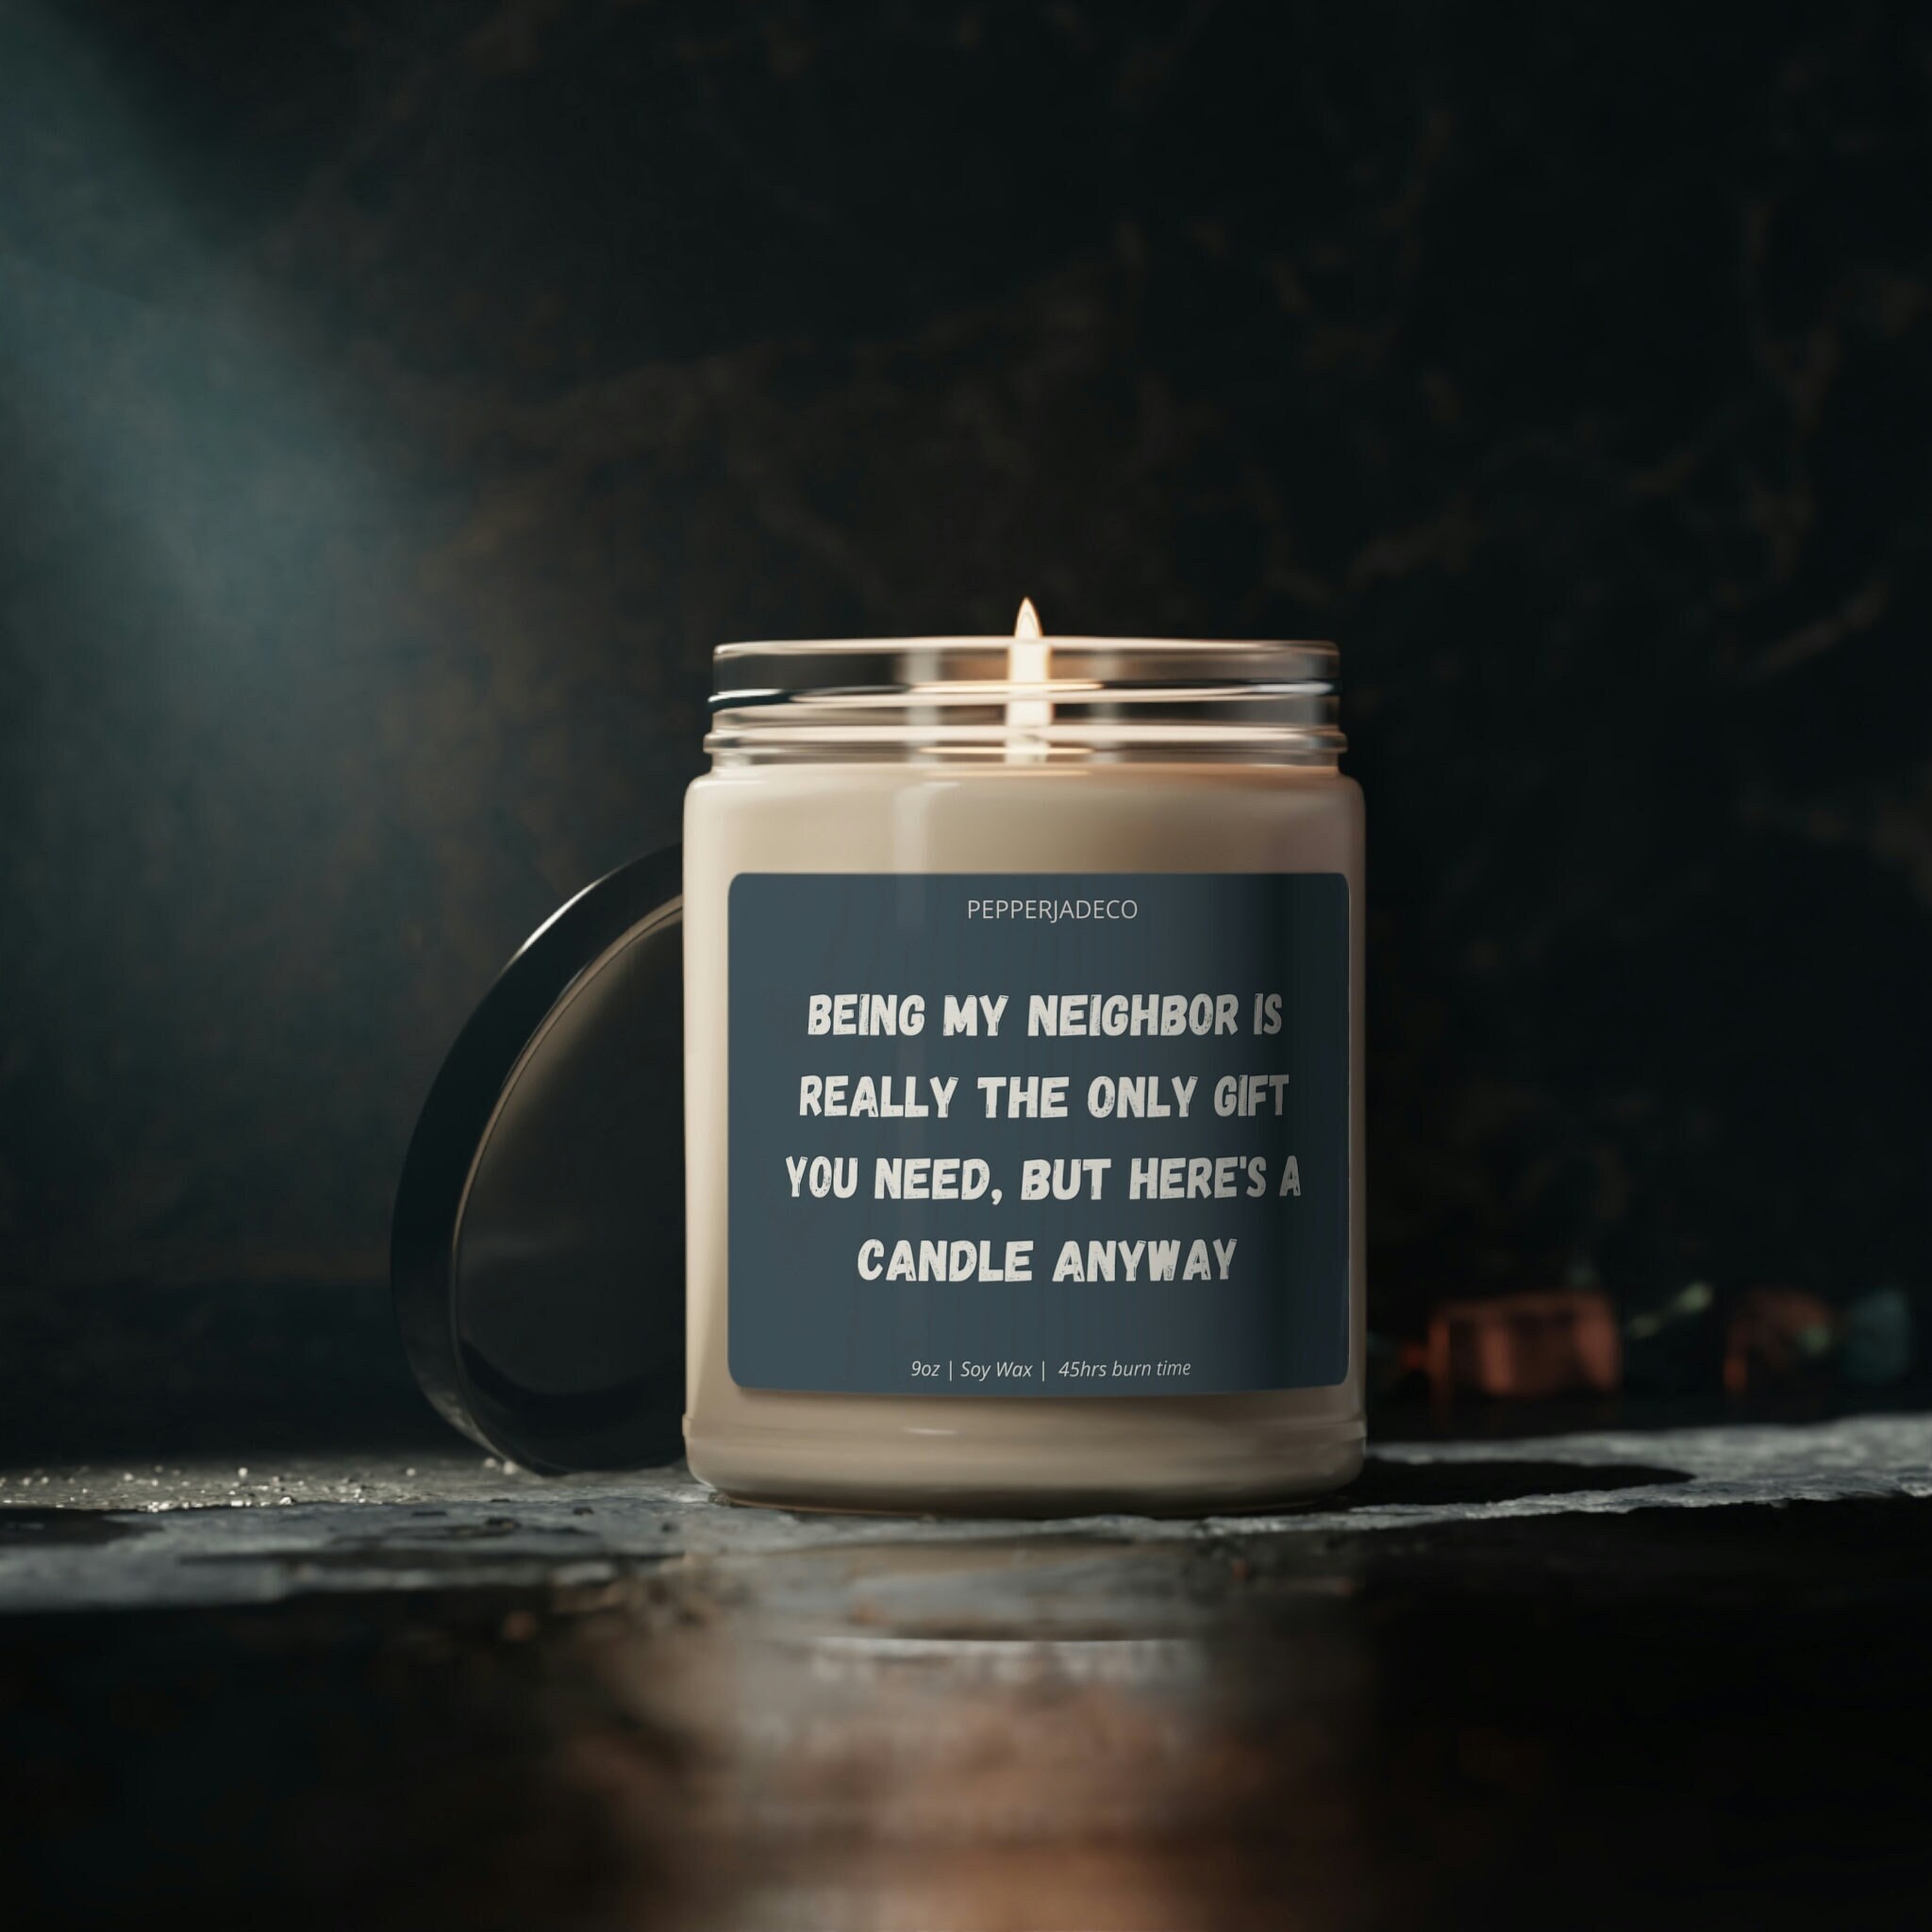 Awesome Neighbor Keep That Shit up Neighbor Gift for Neighbor Housewarming  Gift New Home Gift Our First Home New Homeowner Gift Soy Candles 